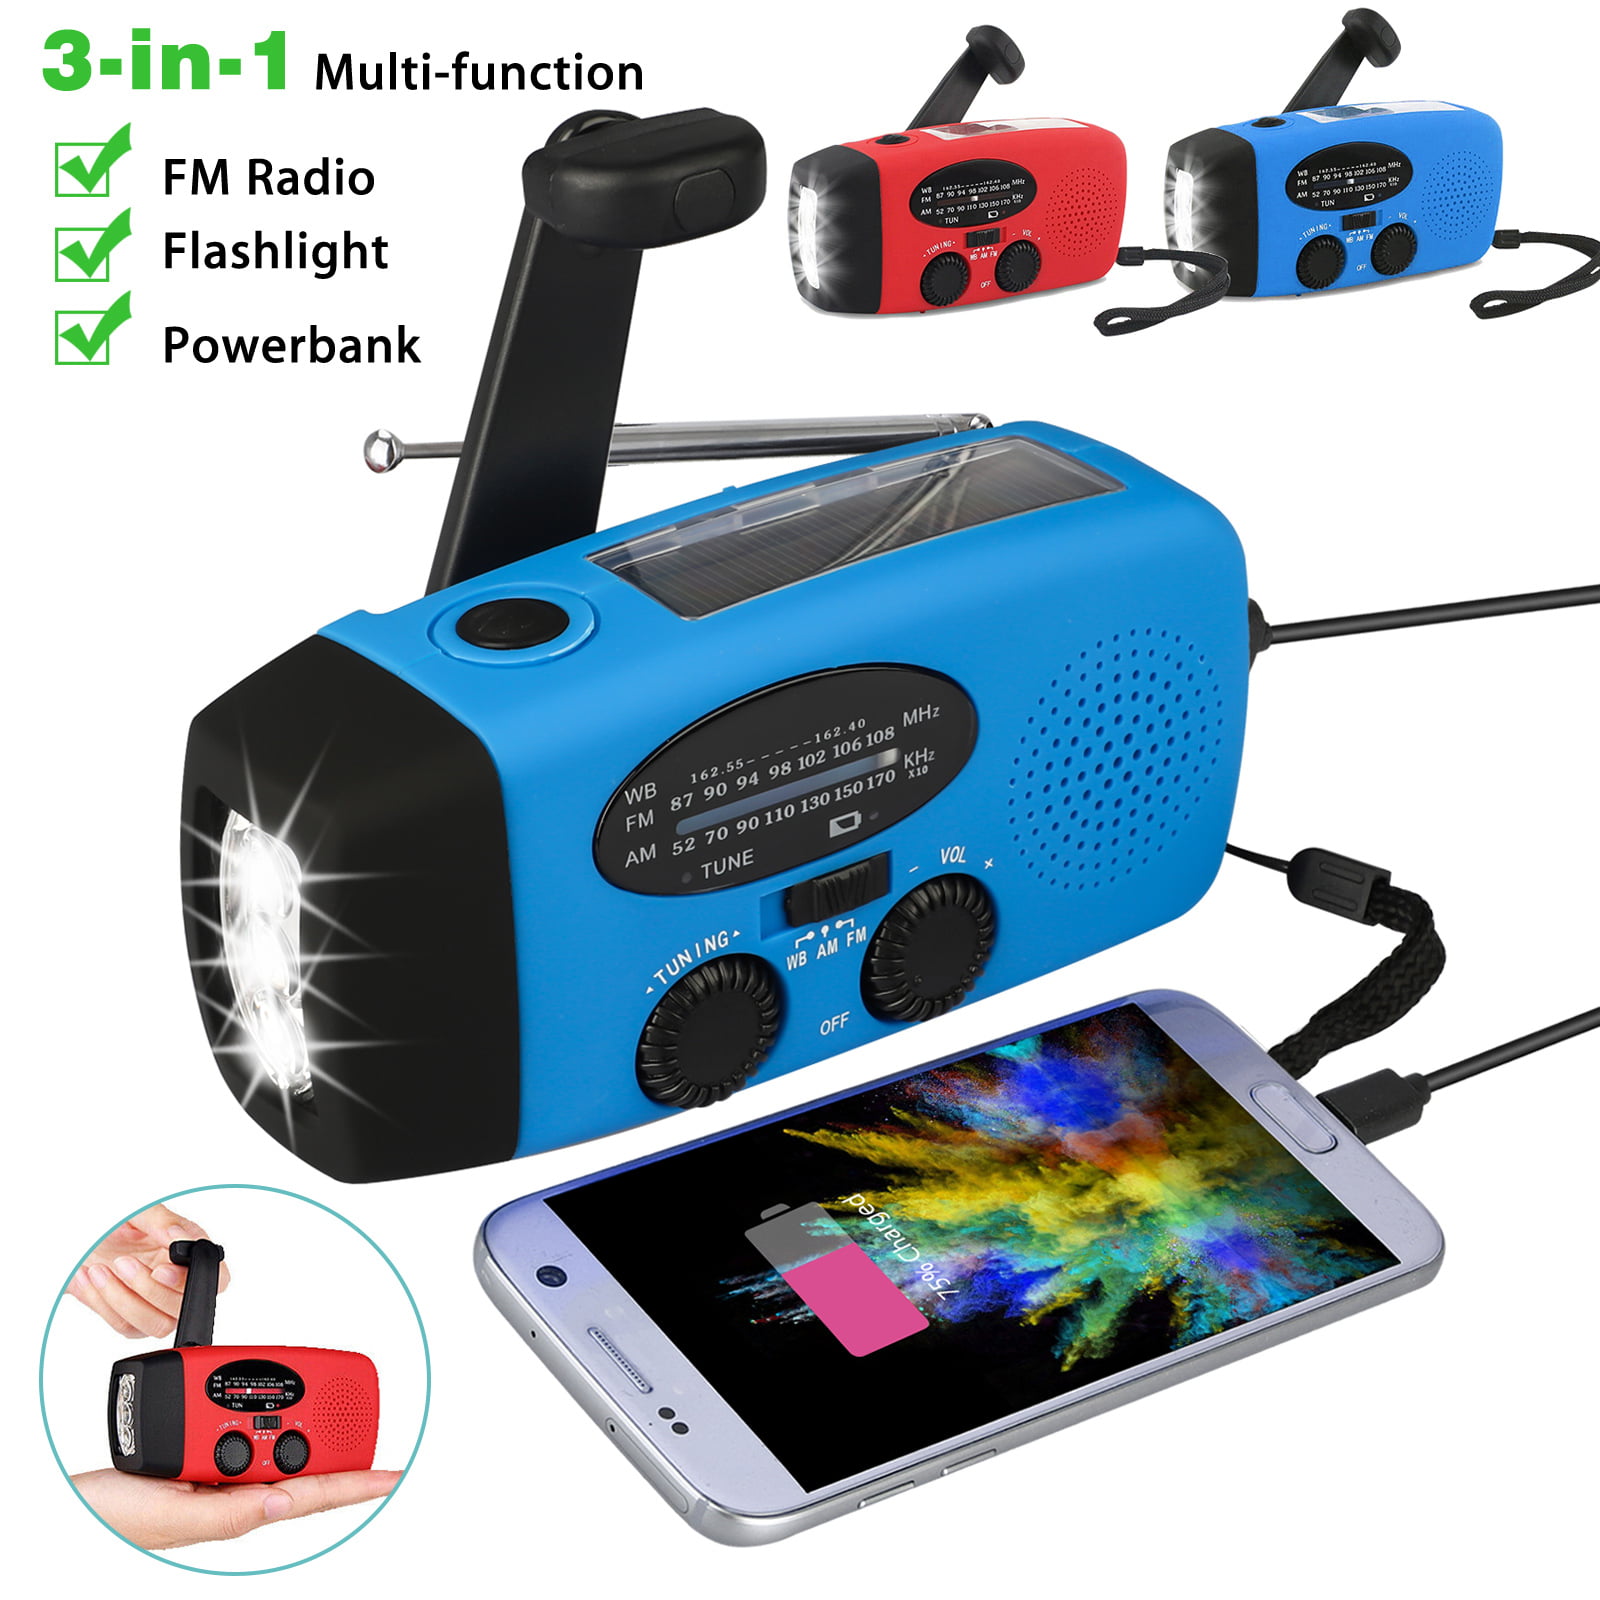 Solar AM//FM Radio,Portable Multi-Function Hand Crank Weather Radio with Emergency Phone Charger Bank and LED Flashlight Function Red